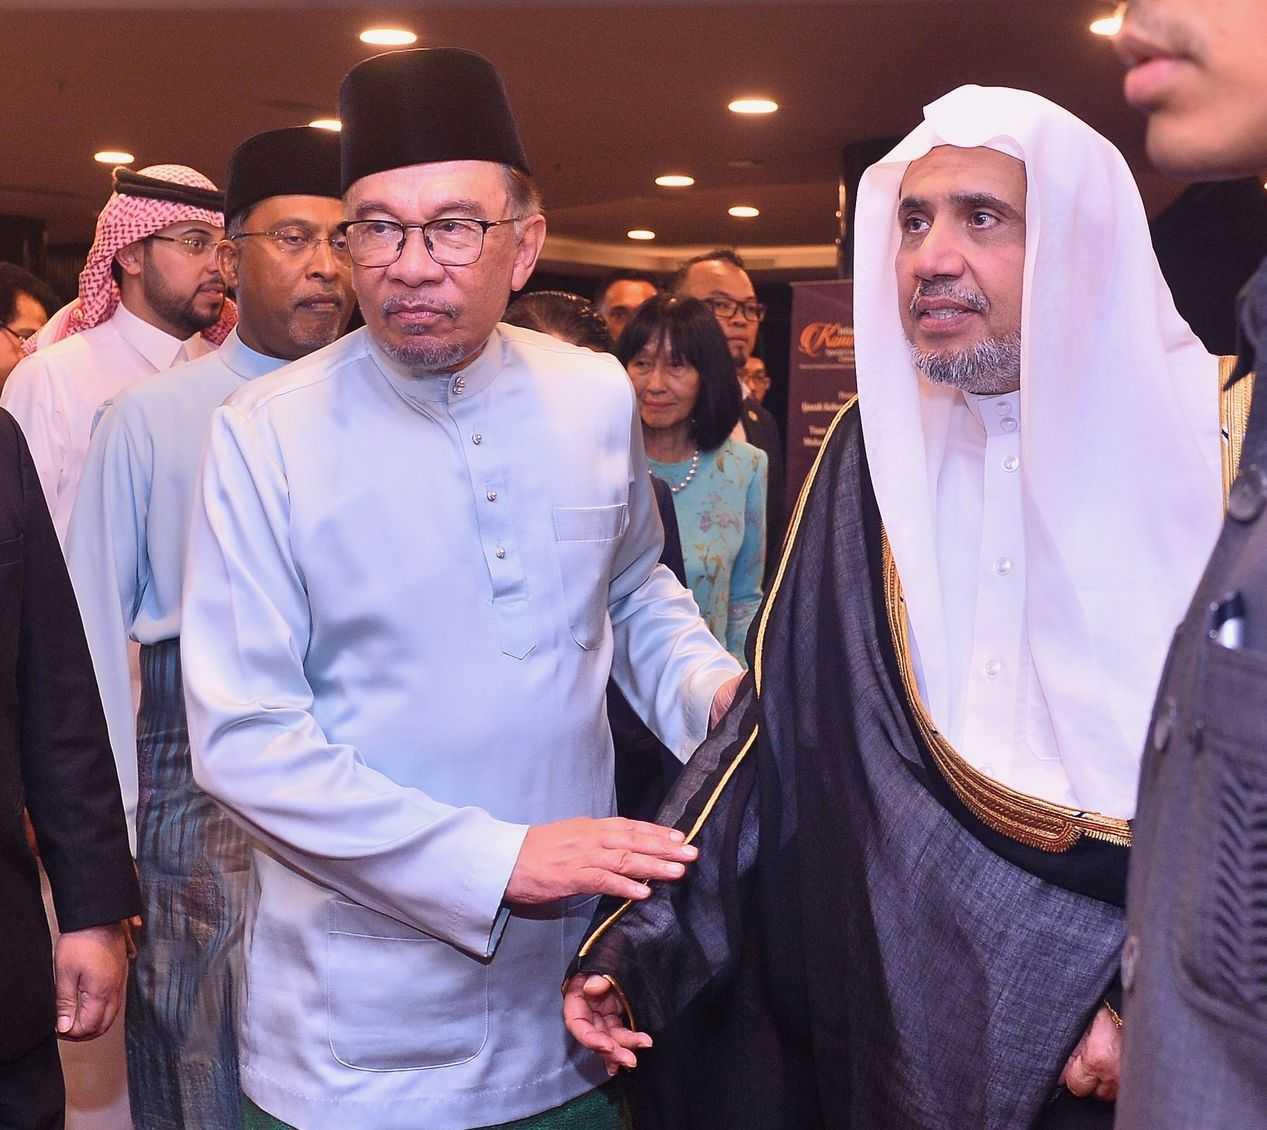 Anwar Ibrahim welcoming Mohammad Abdulkarim Al-Issa, a Saudi scholar who was criticised for his friendly ties with Zionist leaders and groups.